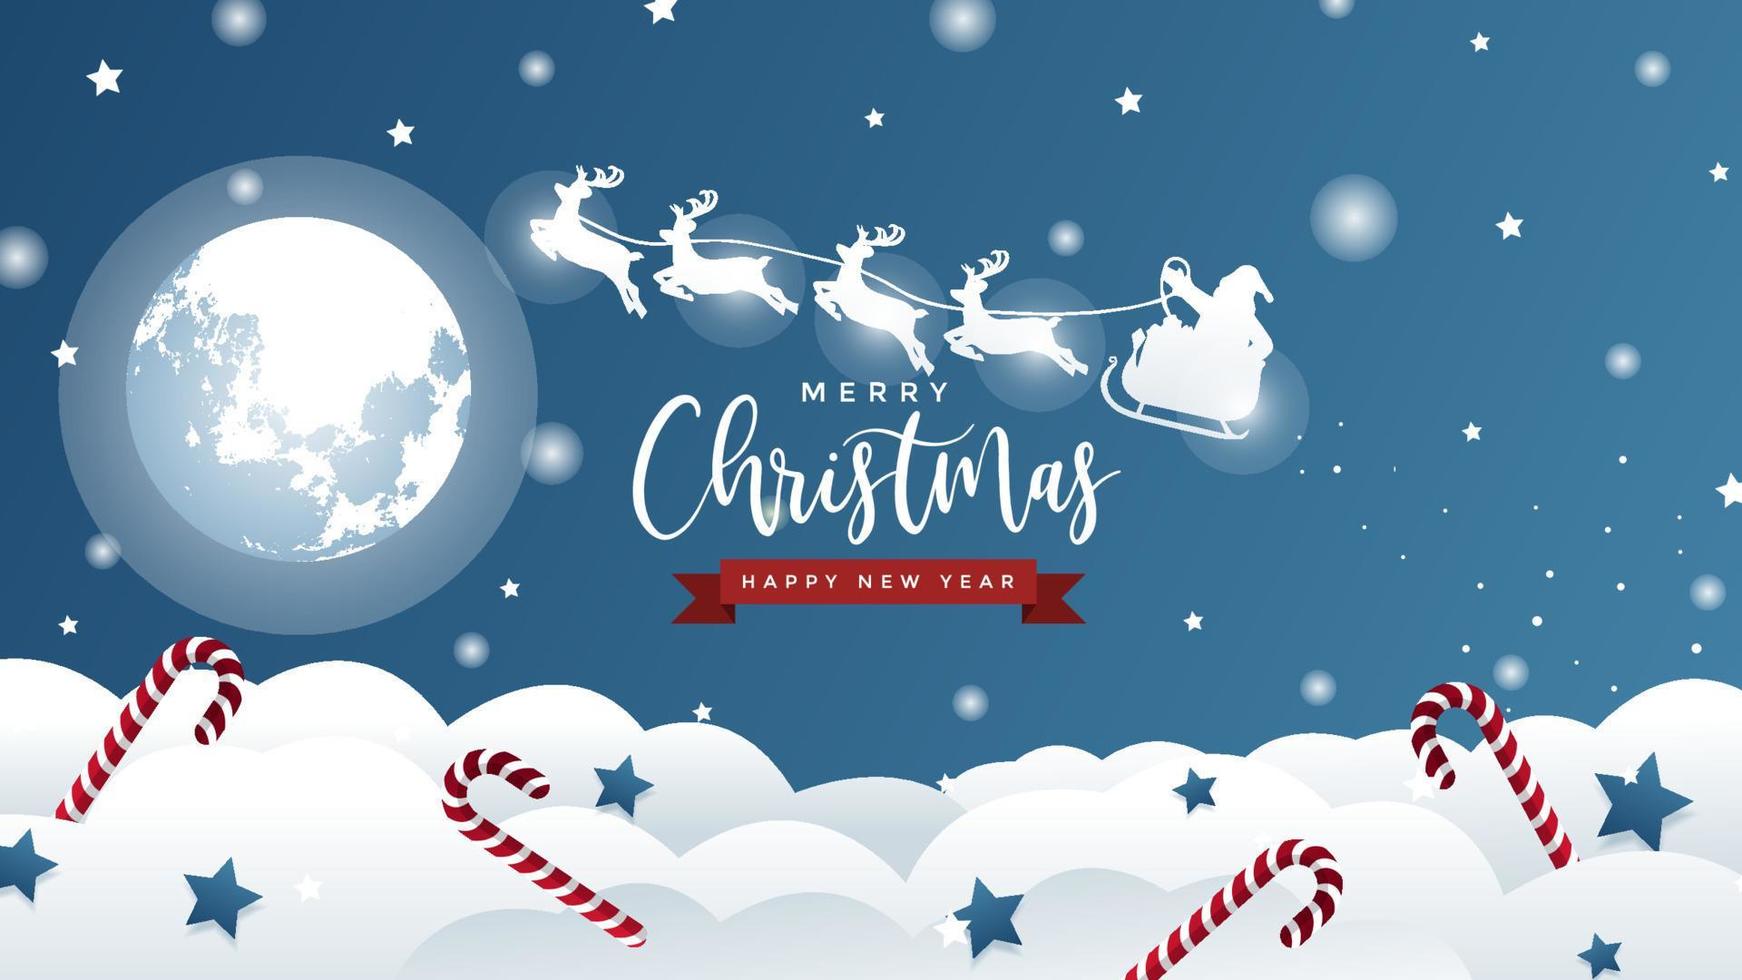 Merry Christmas illustration background. vector